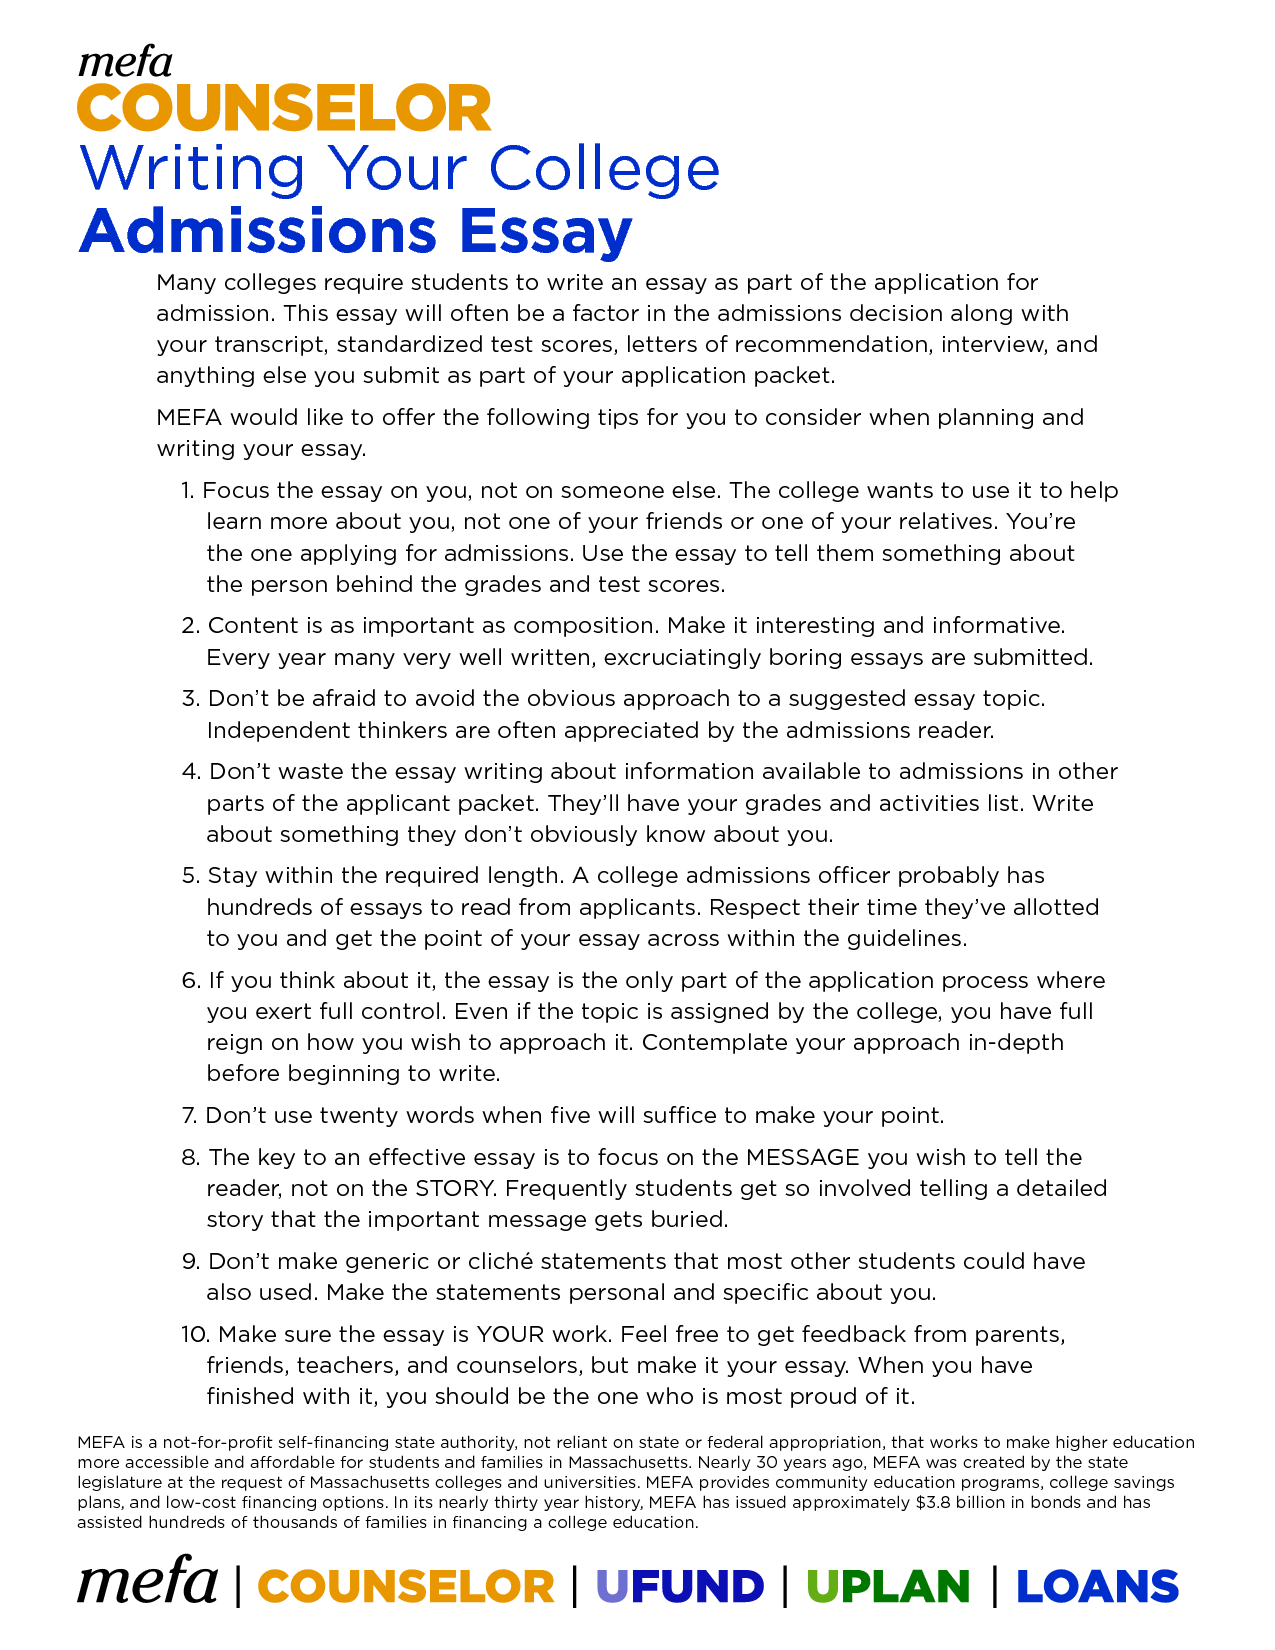 Help with writing college application essays lesson plans